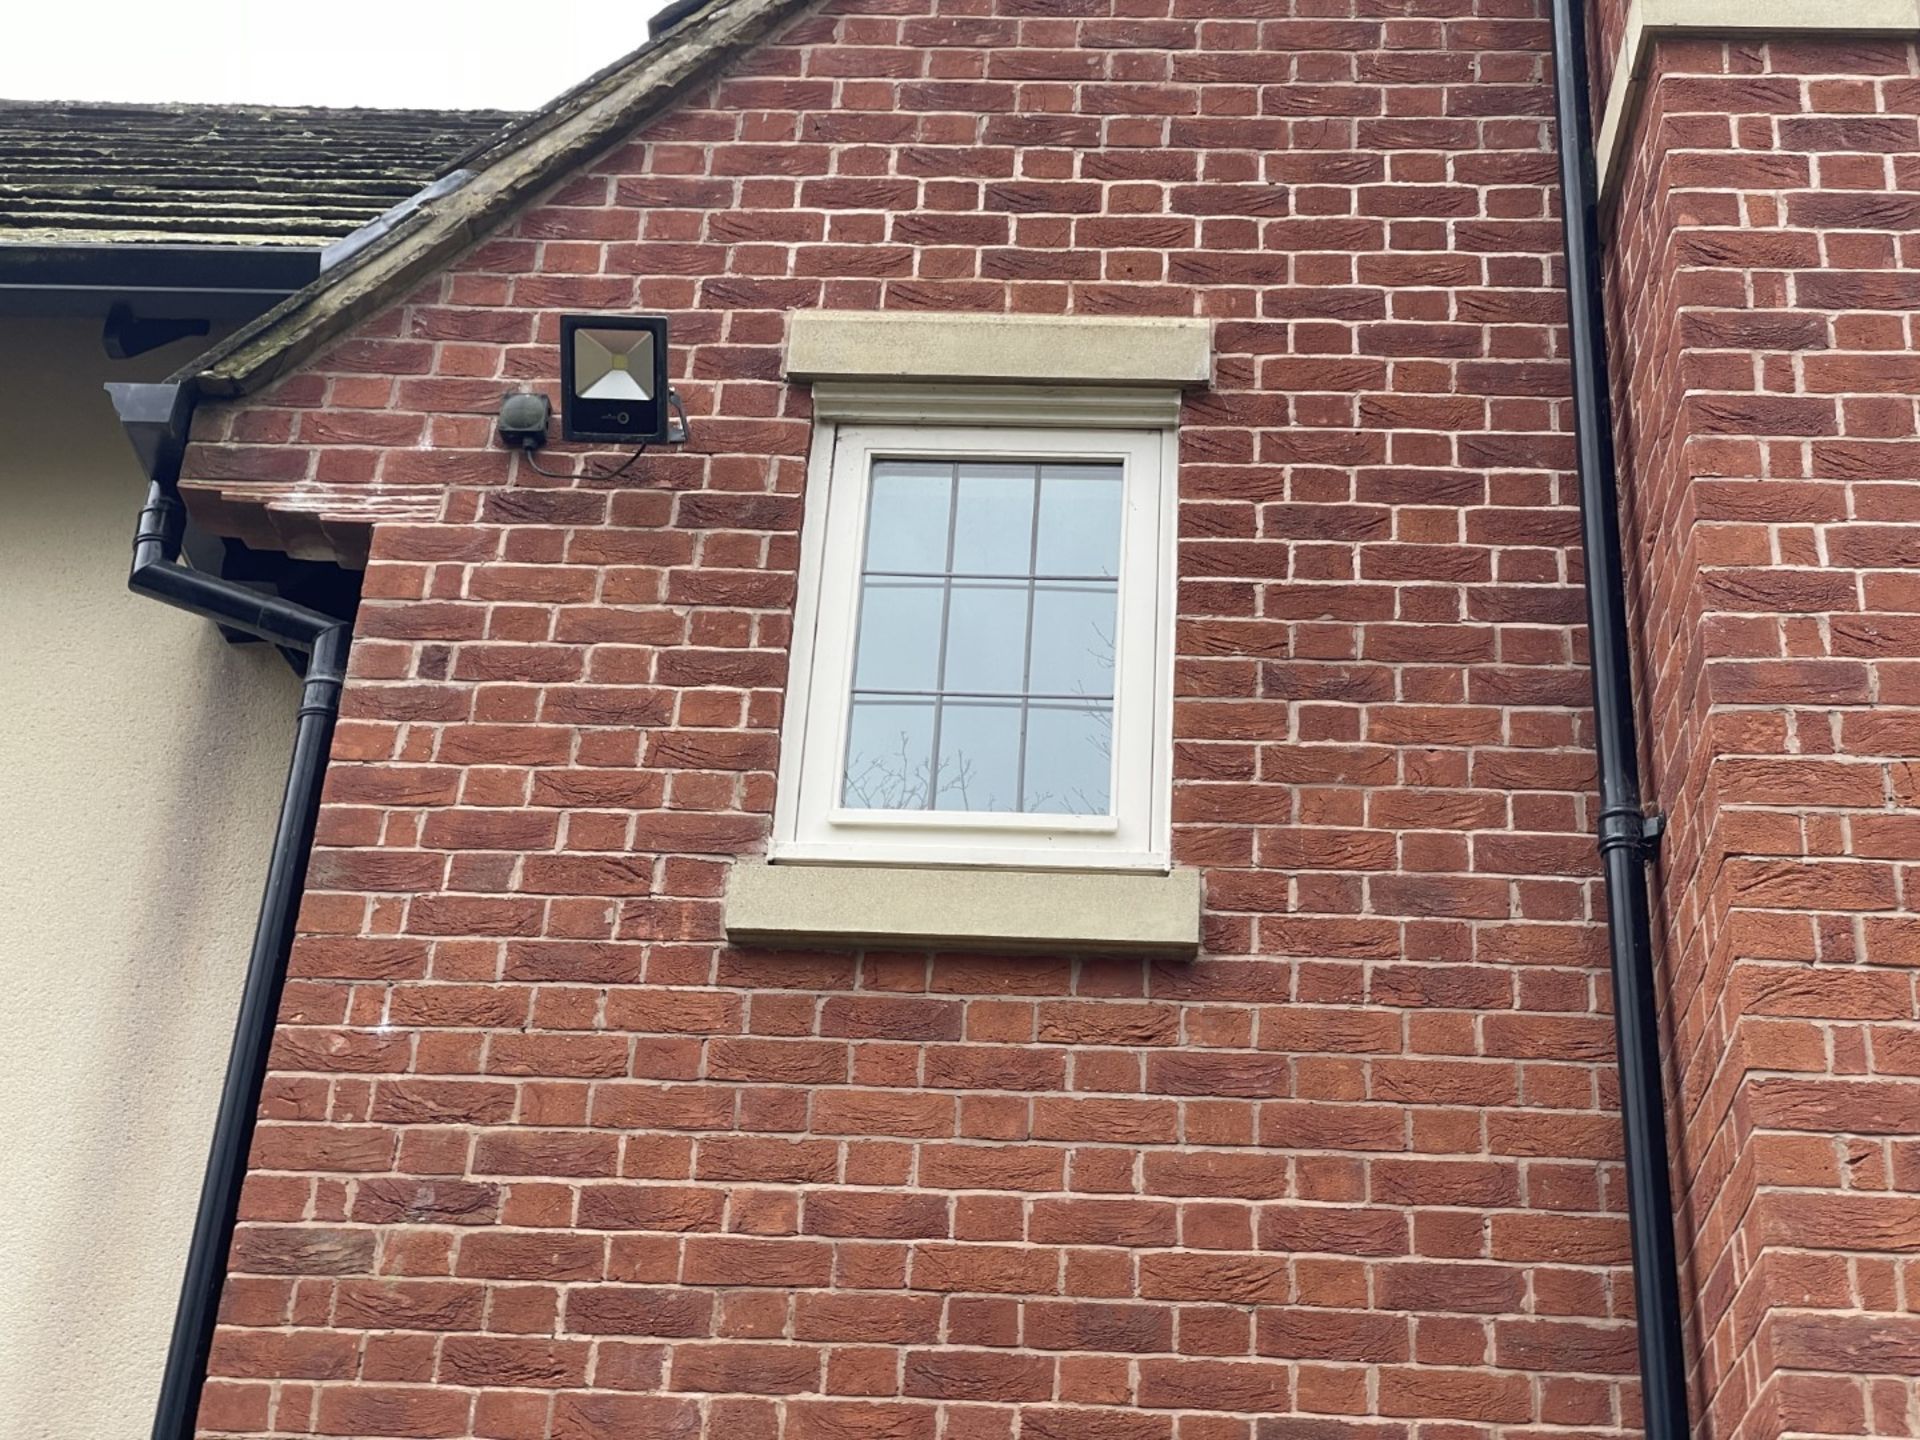 1 x Hardwood Timber Double Glazed & Leaded Window Frame - Ref: PAN216 - CL896 - NO VAT ON THE HAMMER - Image 8 of 12